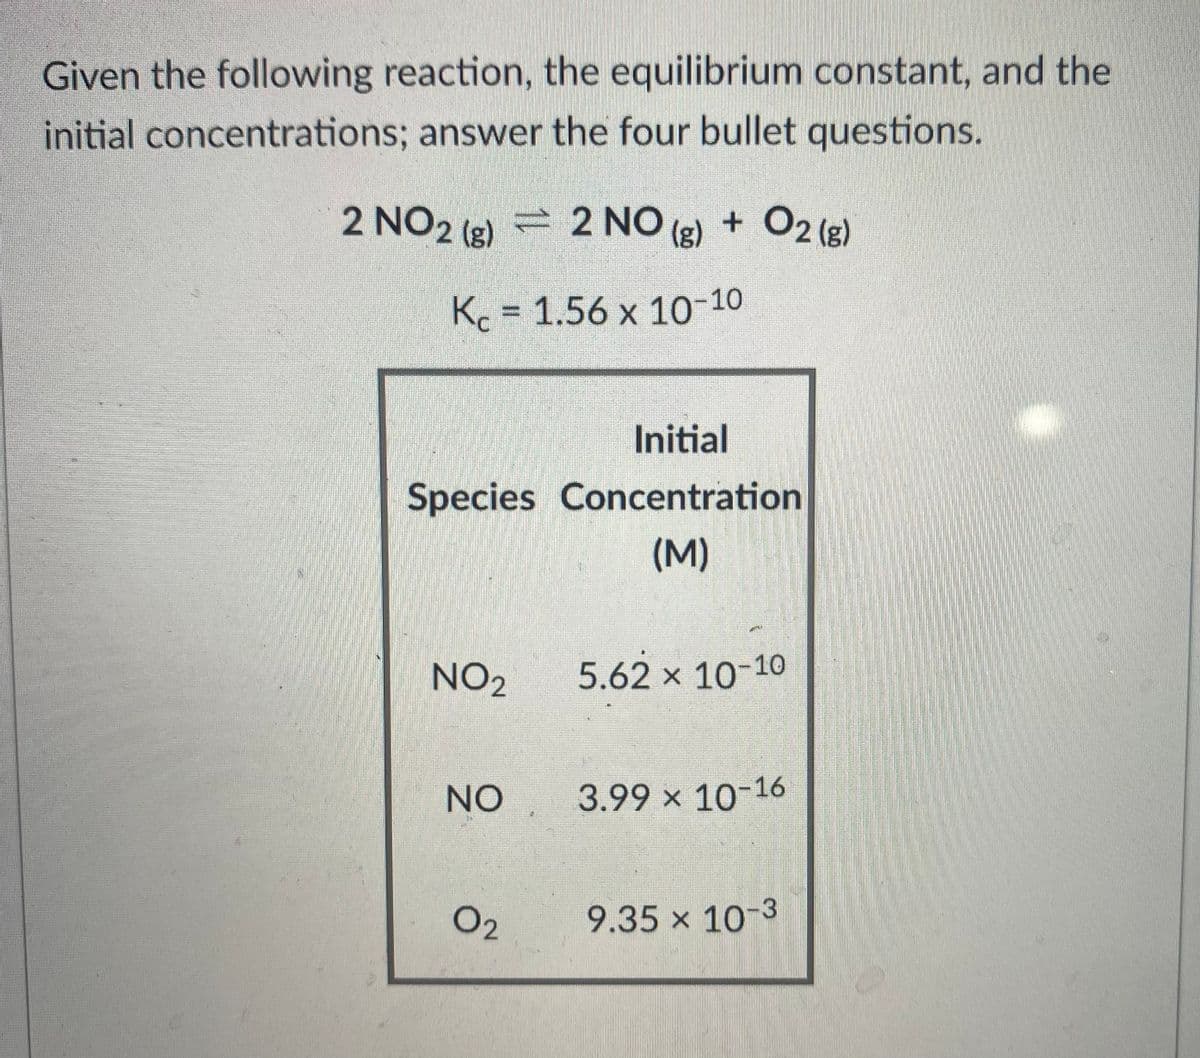 Given the following reaction, the equilibrium constant, and the
initial concentrations; answer the four bullet questions.
2 NO2 (e) 2 NO
(g) + O2 (e)
Kc = 1.56 x 10-10
Initial
Species Concentration
(M)
NO2
5.62 x 10-10
NO
3.99 x 10-16
02
9.35 x 10-3
